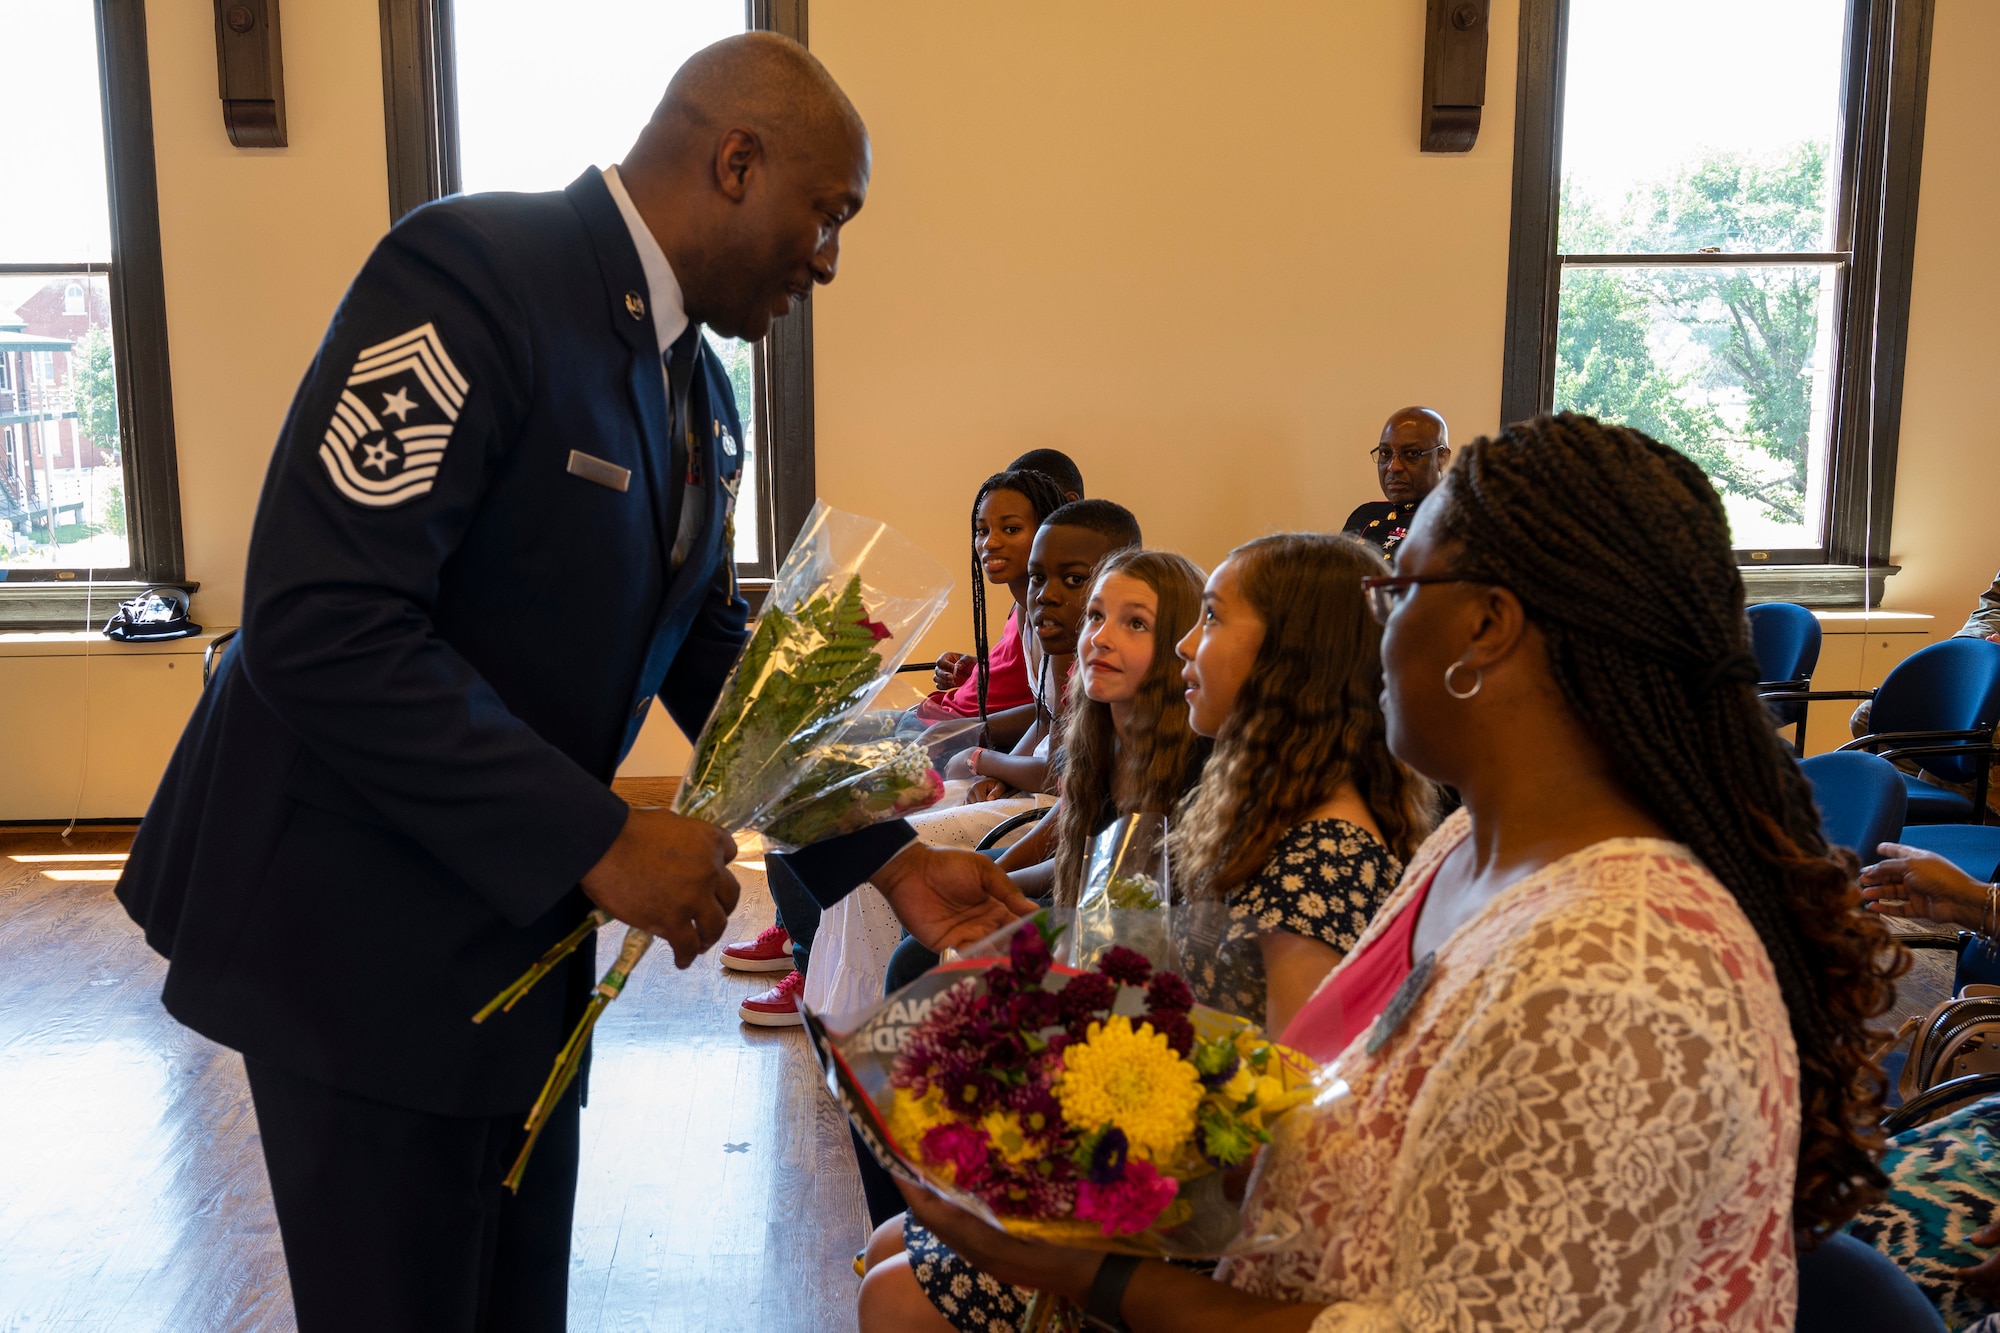 Chief Master Sgt. LeRoy E. McCardell Jr., 131st Bomb Wing command chief master sergeant, gives his daughters flowers during his retirement ceremony, June 25, 2022, at Jefferson Barracks Air National Guard Base, St. Louis, Missouri. McCardell served for 34 years. (U.S. Air National Guard photo by Senior Airman Whitney Erhart)